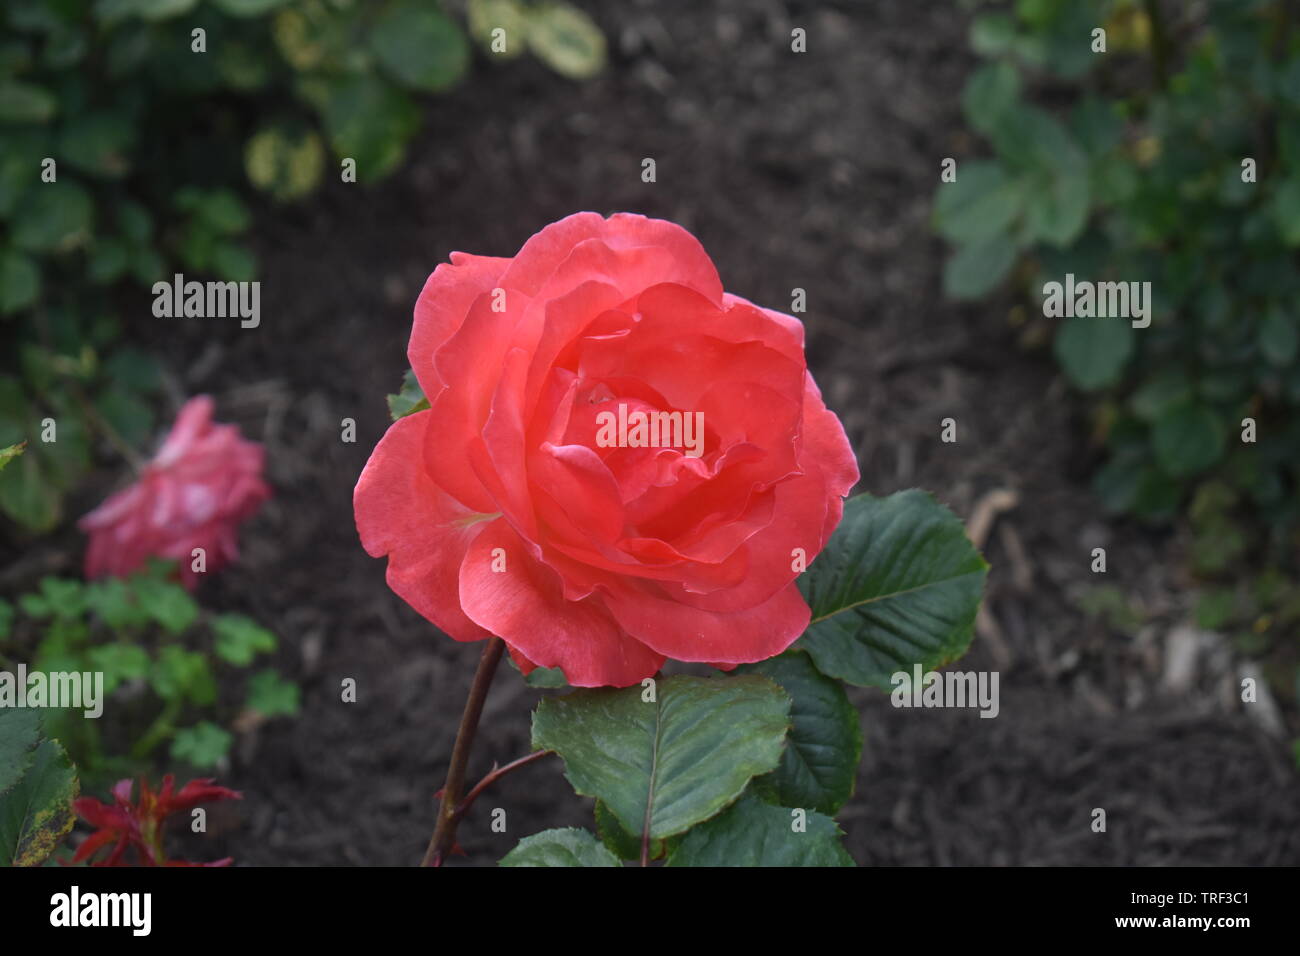 Large isolated peach, or salmon colored rose on a bed of dark green leaves Stock Photo